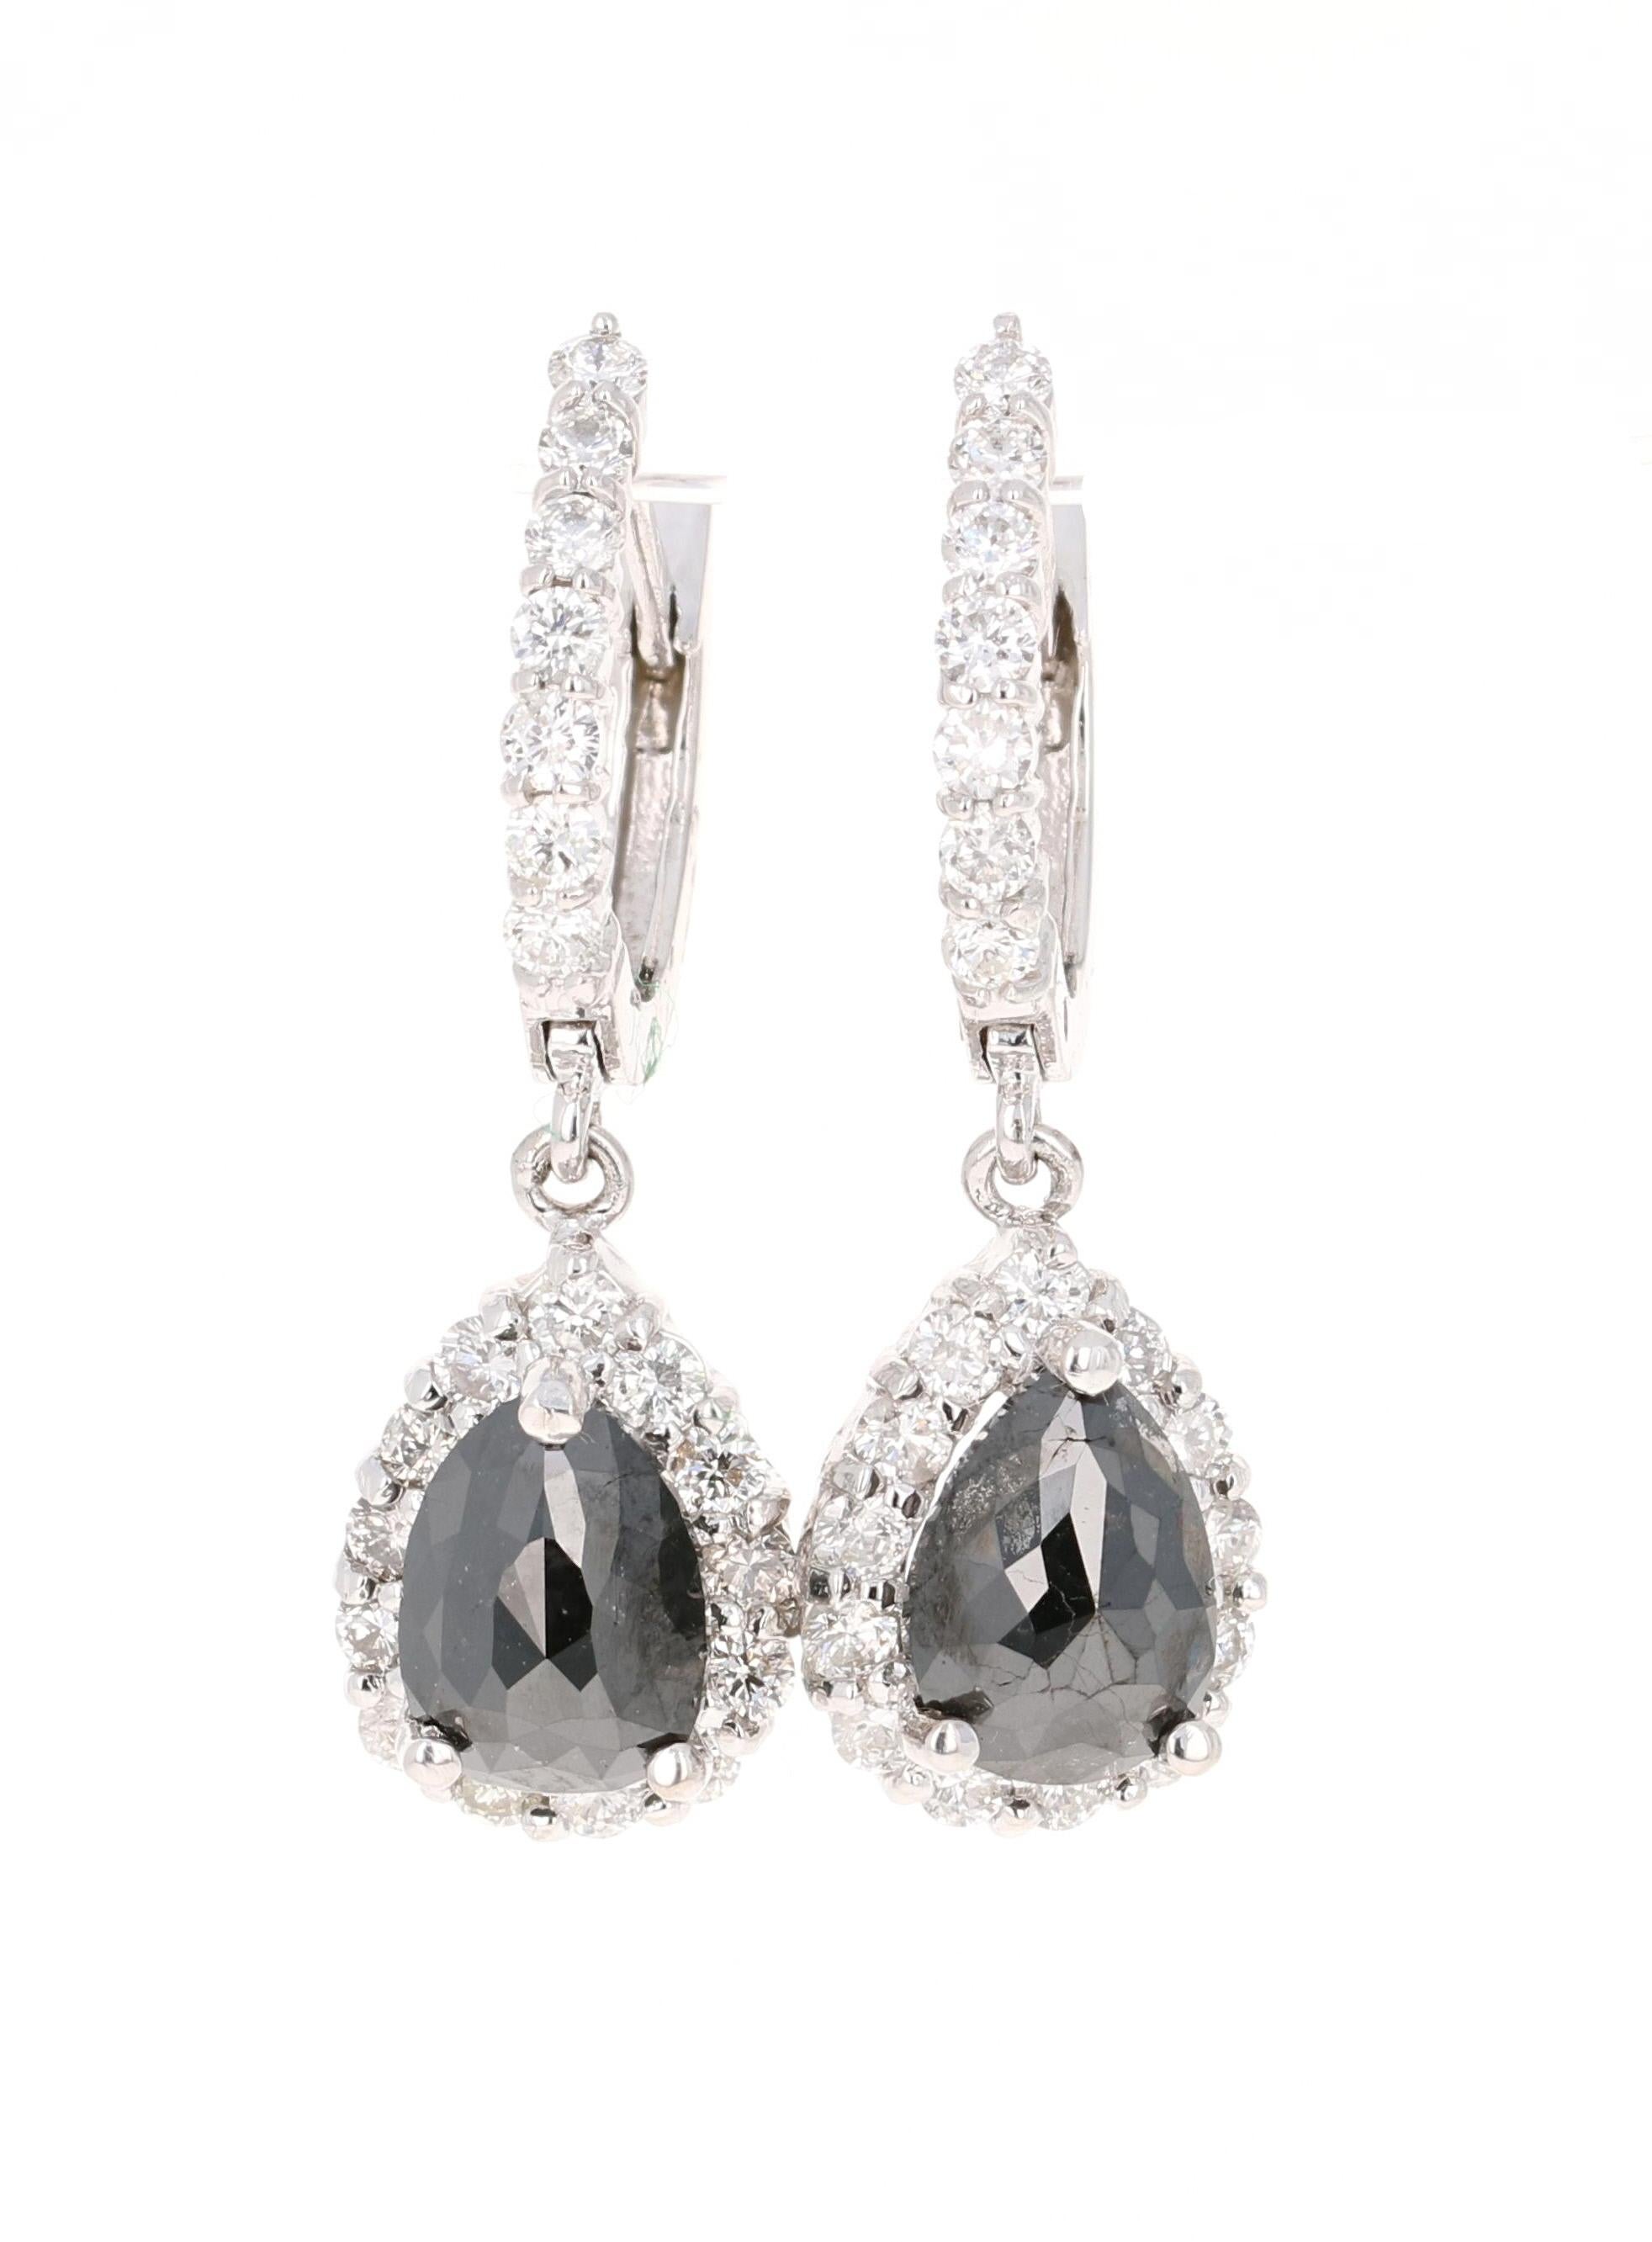 These beauties have 2 Black Pear Cut Diamonds that weigh 2.54 Carats and 40 Round Cut Diamonds that weigh 1.21 Carats. The total carat weight of the earrings are 3.75 Carats. The pear cut black diamonds measure at approximately 9 x 7 mm. The length